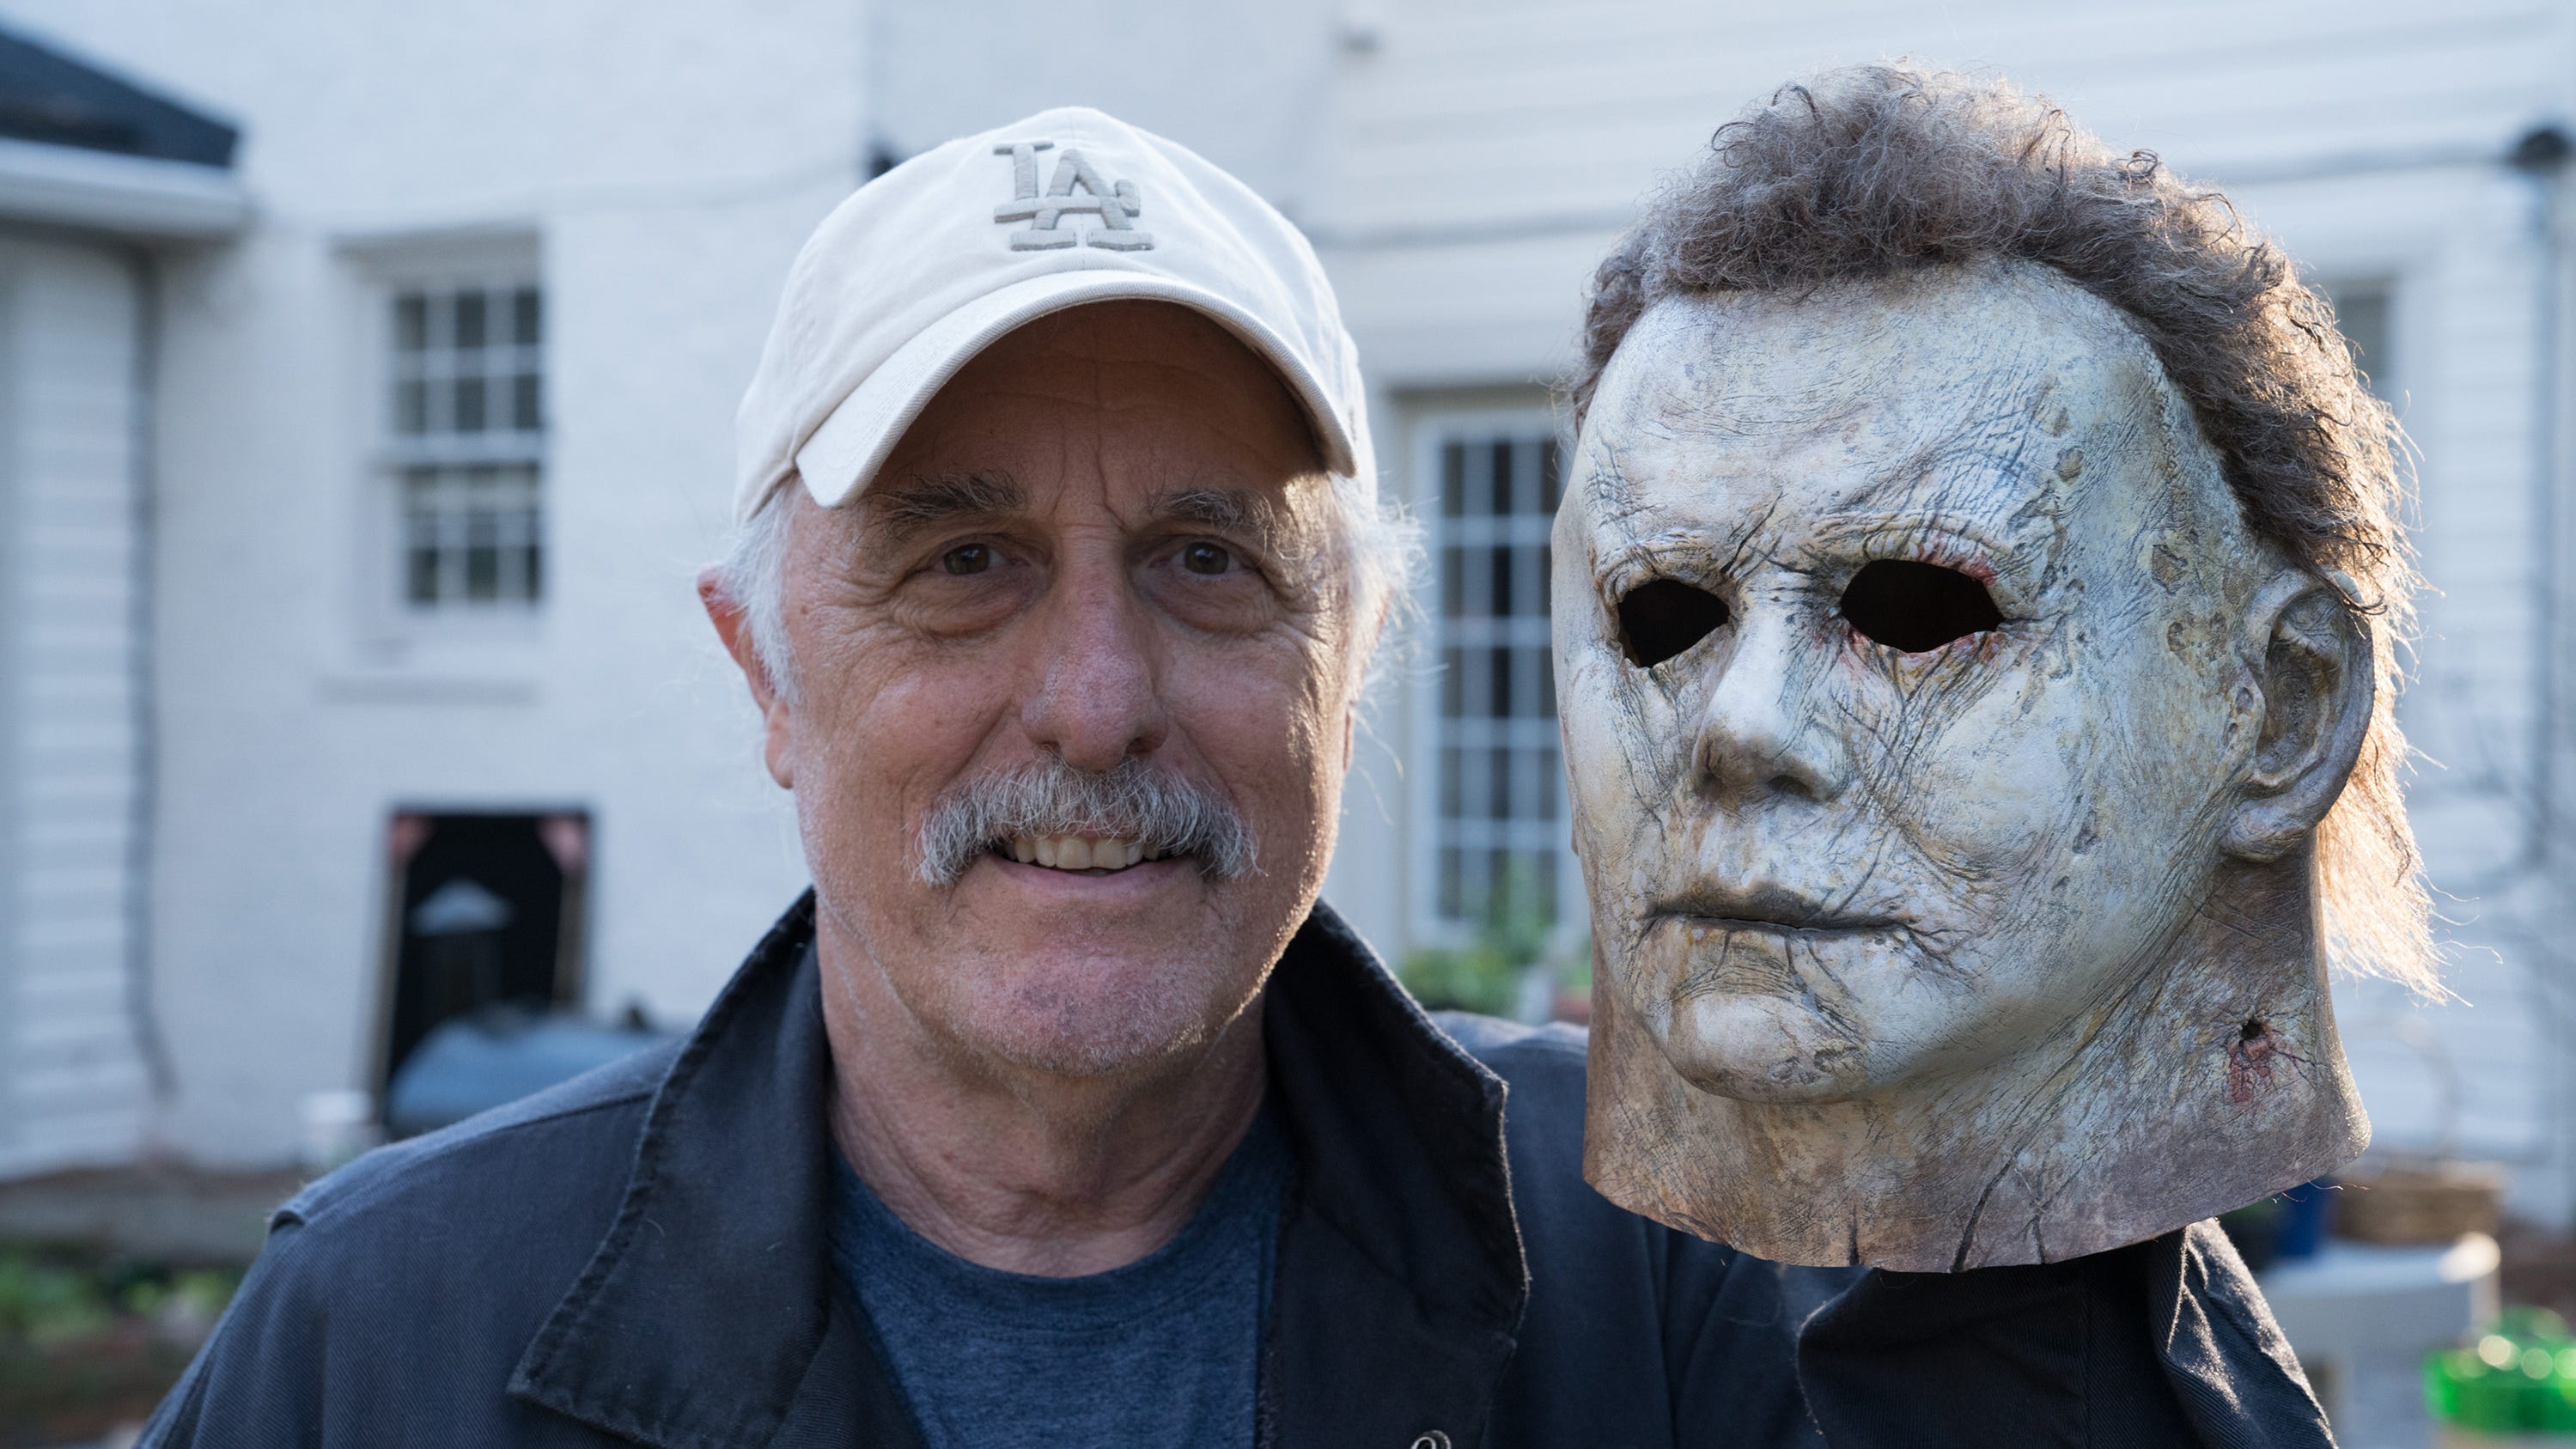 how old is michael myers in halloween 2020 Halloween Nick Castle Puts On The Mask Once More As Michael Myers how old is michael myers in halloween 2020